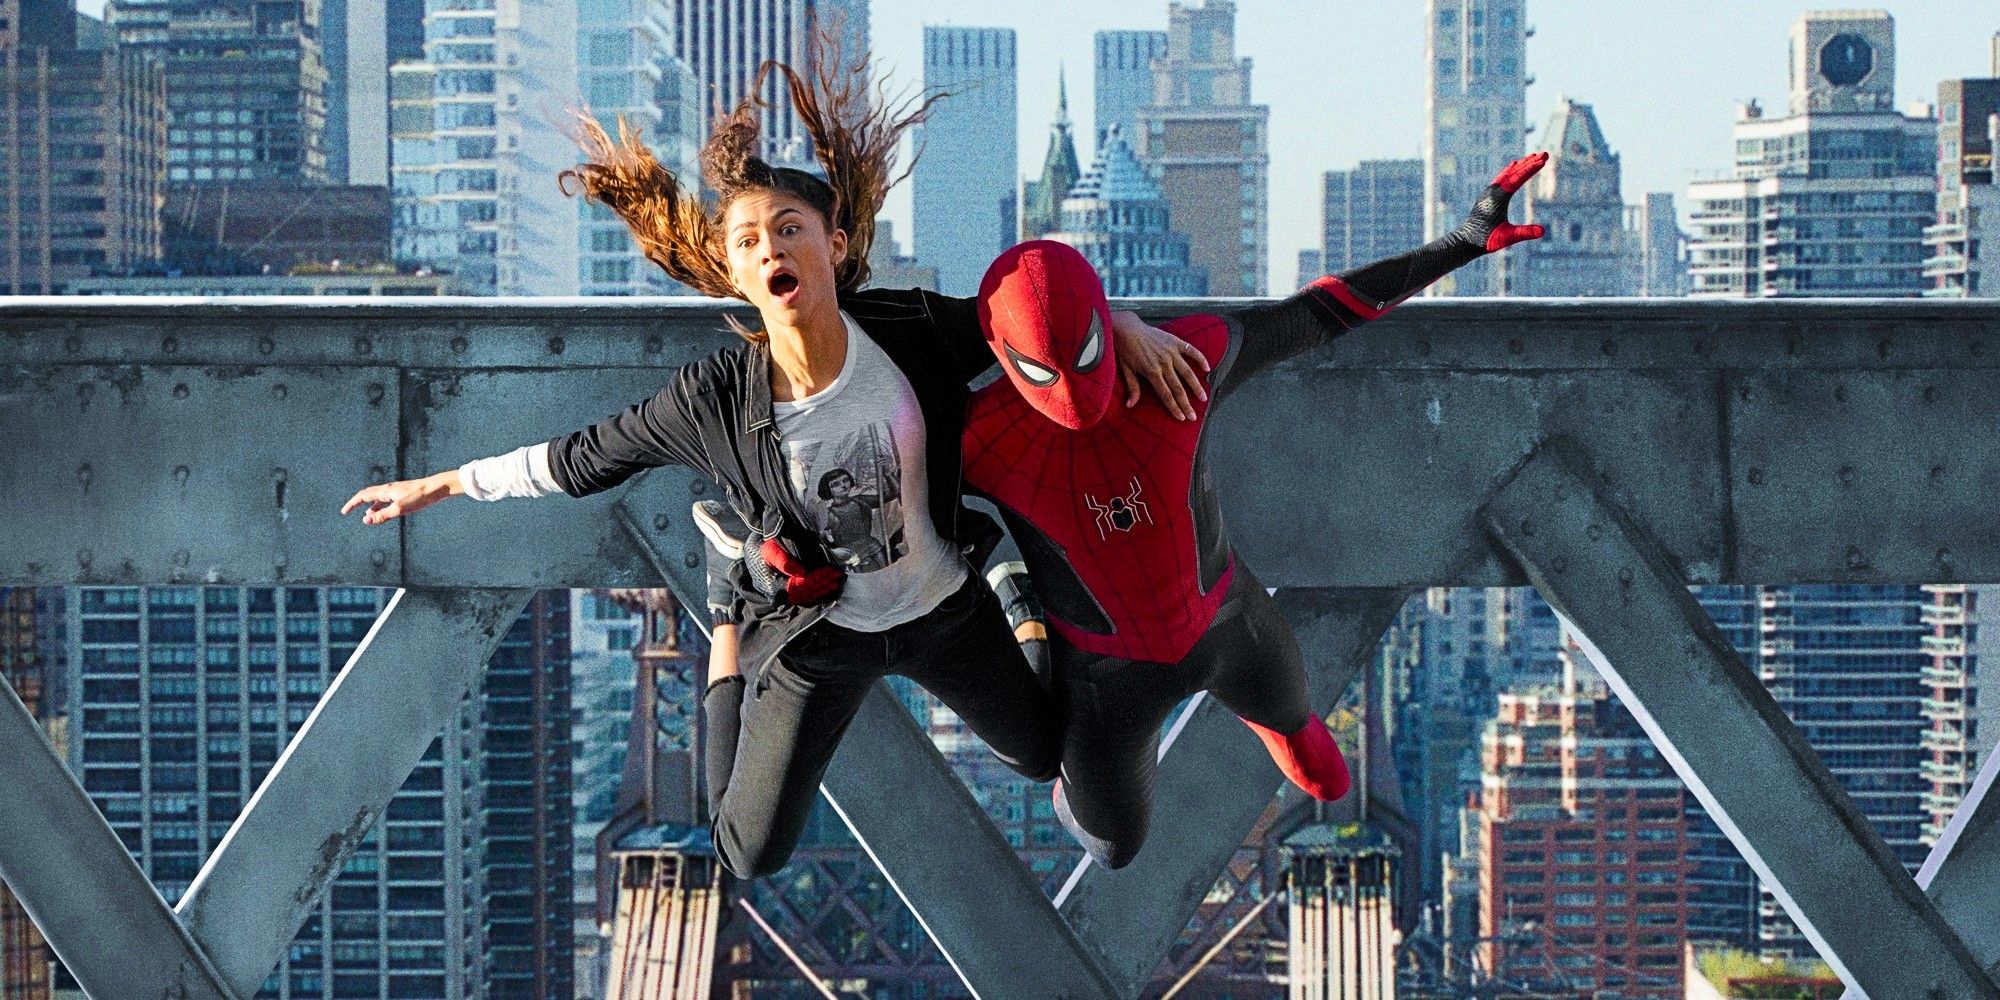 Zendaya and Tom Holland swinging through the air in Spider-Man No Way Home